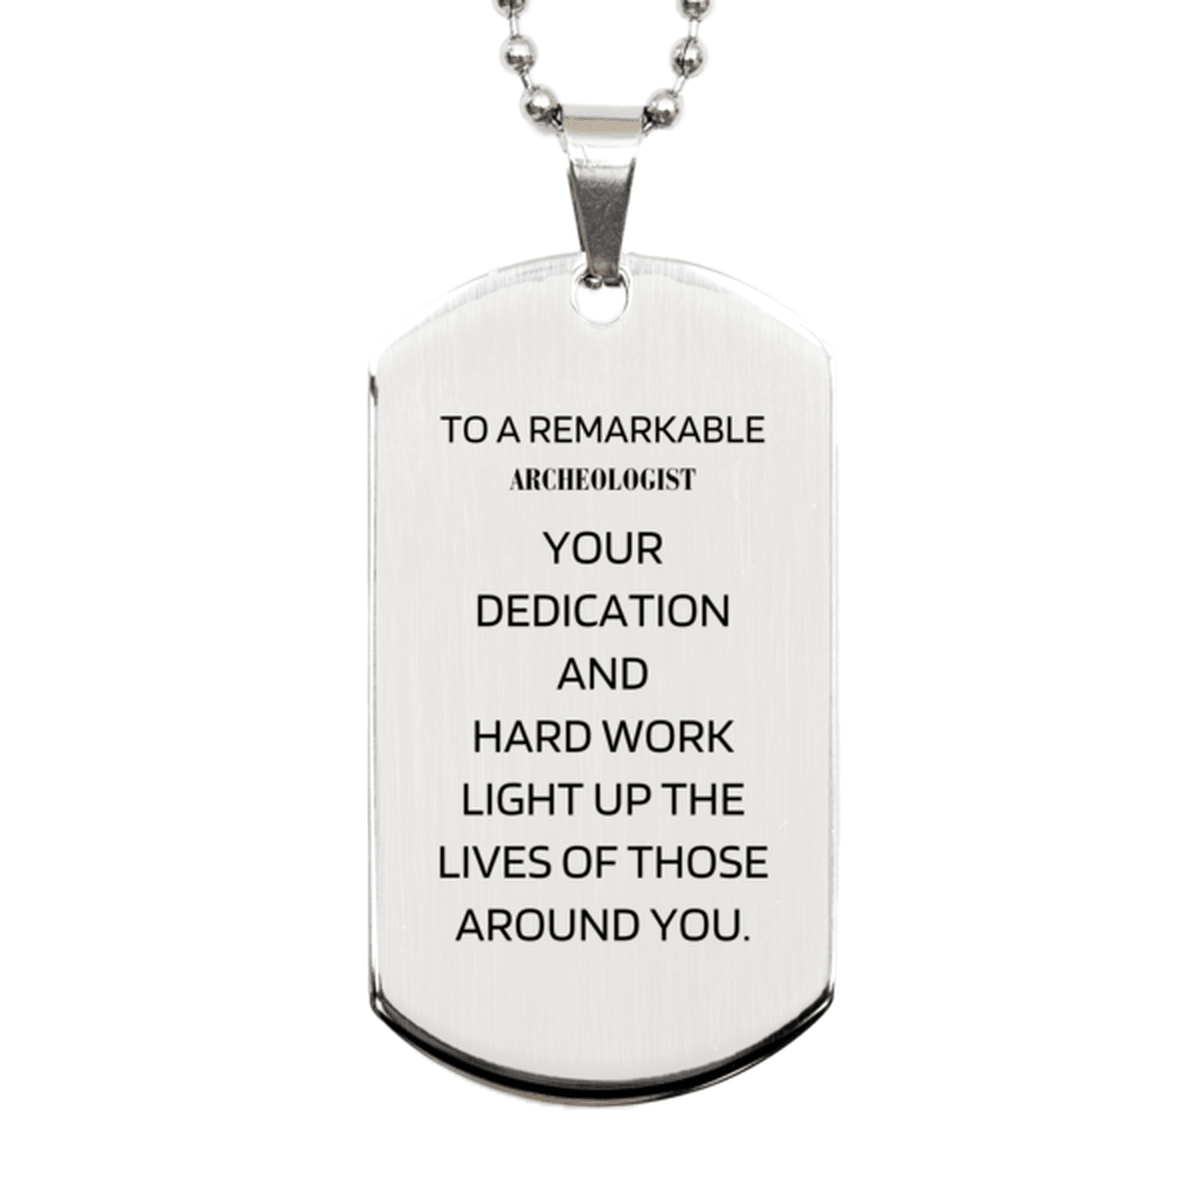 Remarkable Archeologist Gifts, Your dedication and hard work, Inspirational Birthday Christmas Unique Silver Dog Tag For Archeologist, Coworkers, Men, Women, Friends - Mallard Moon Gift Shop